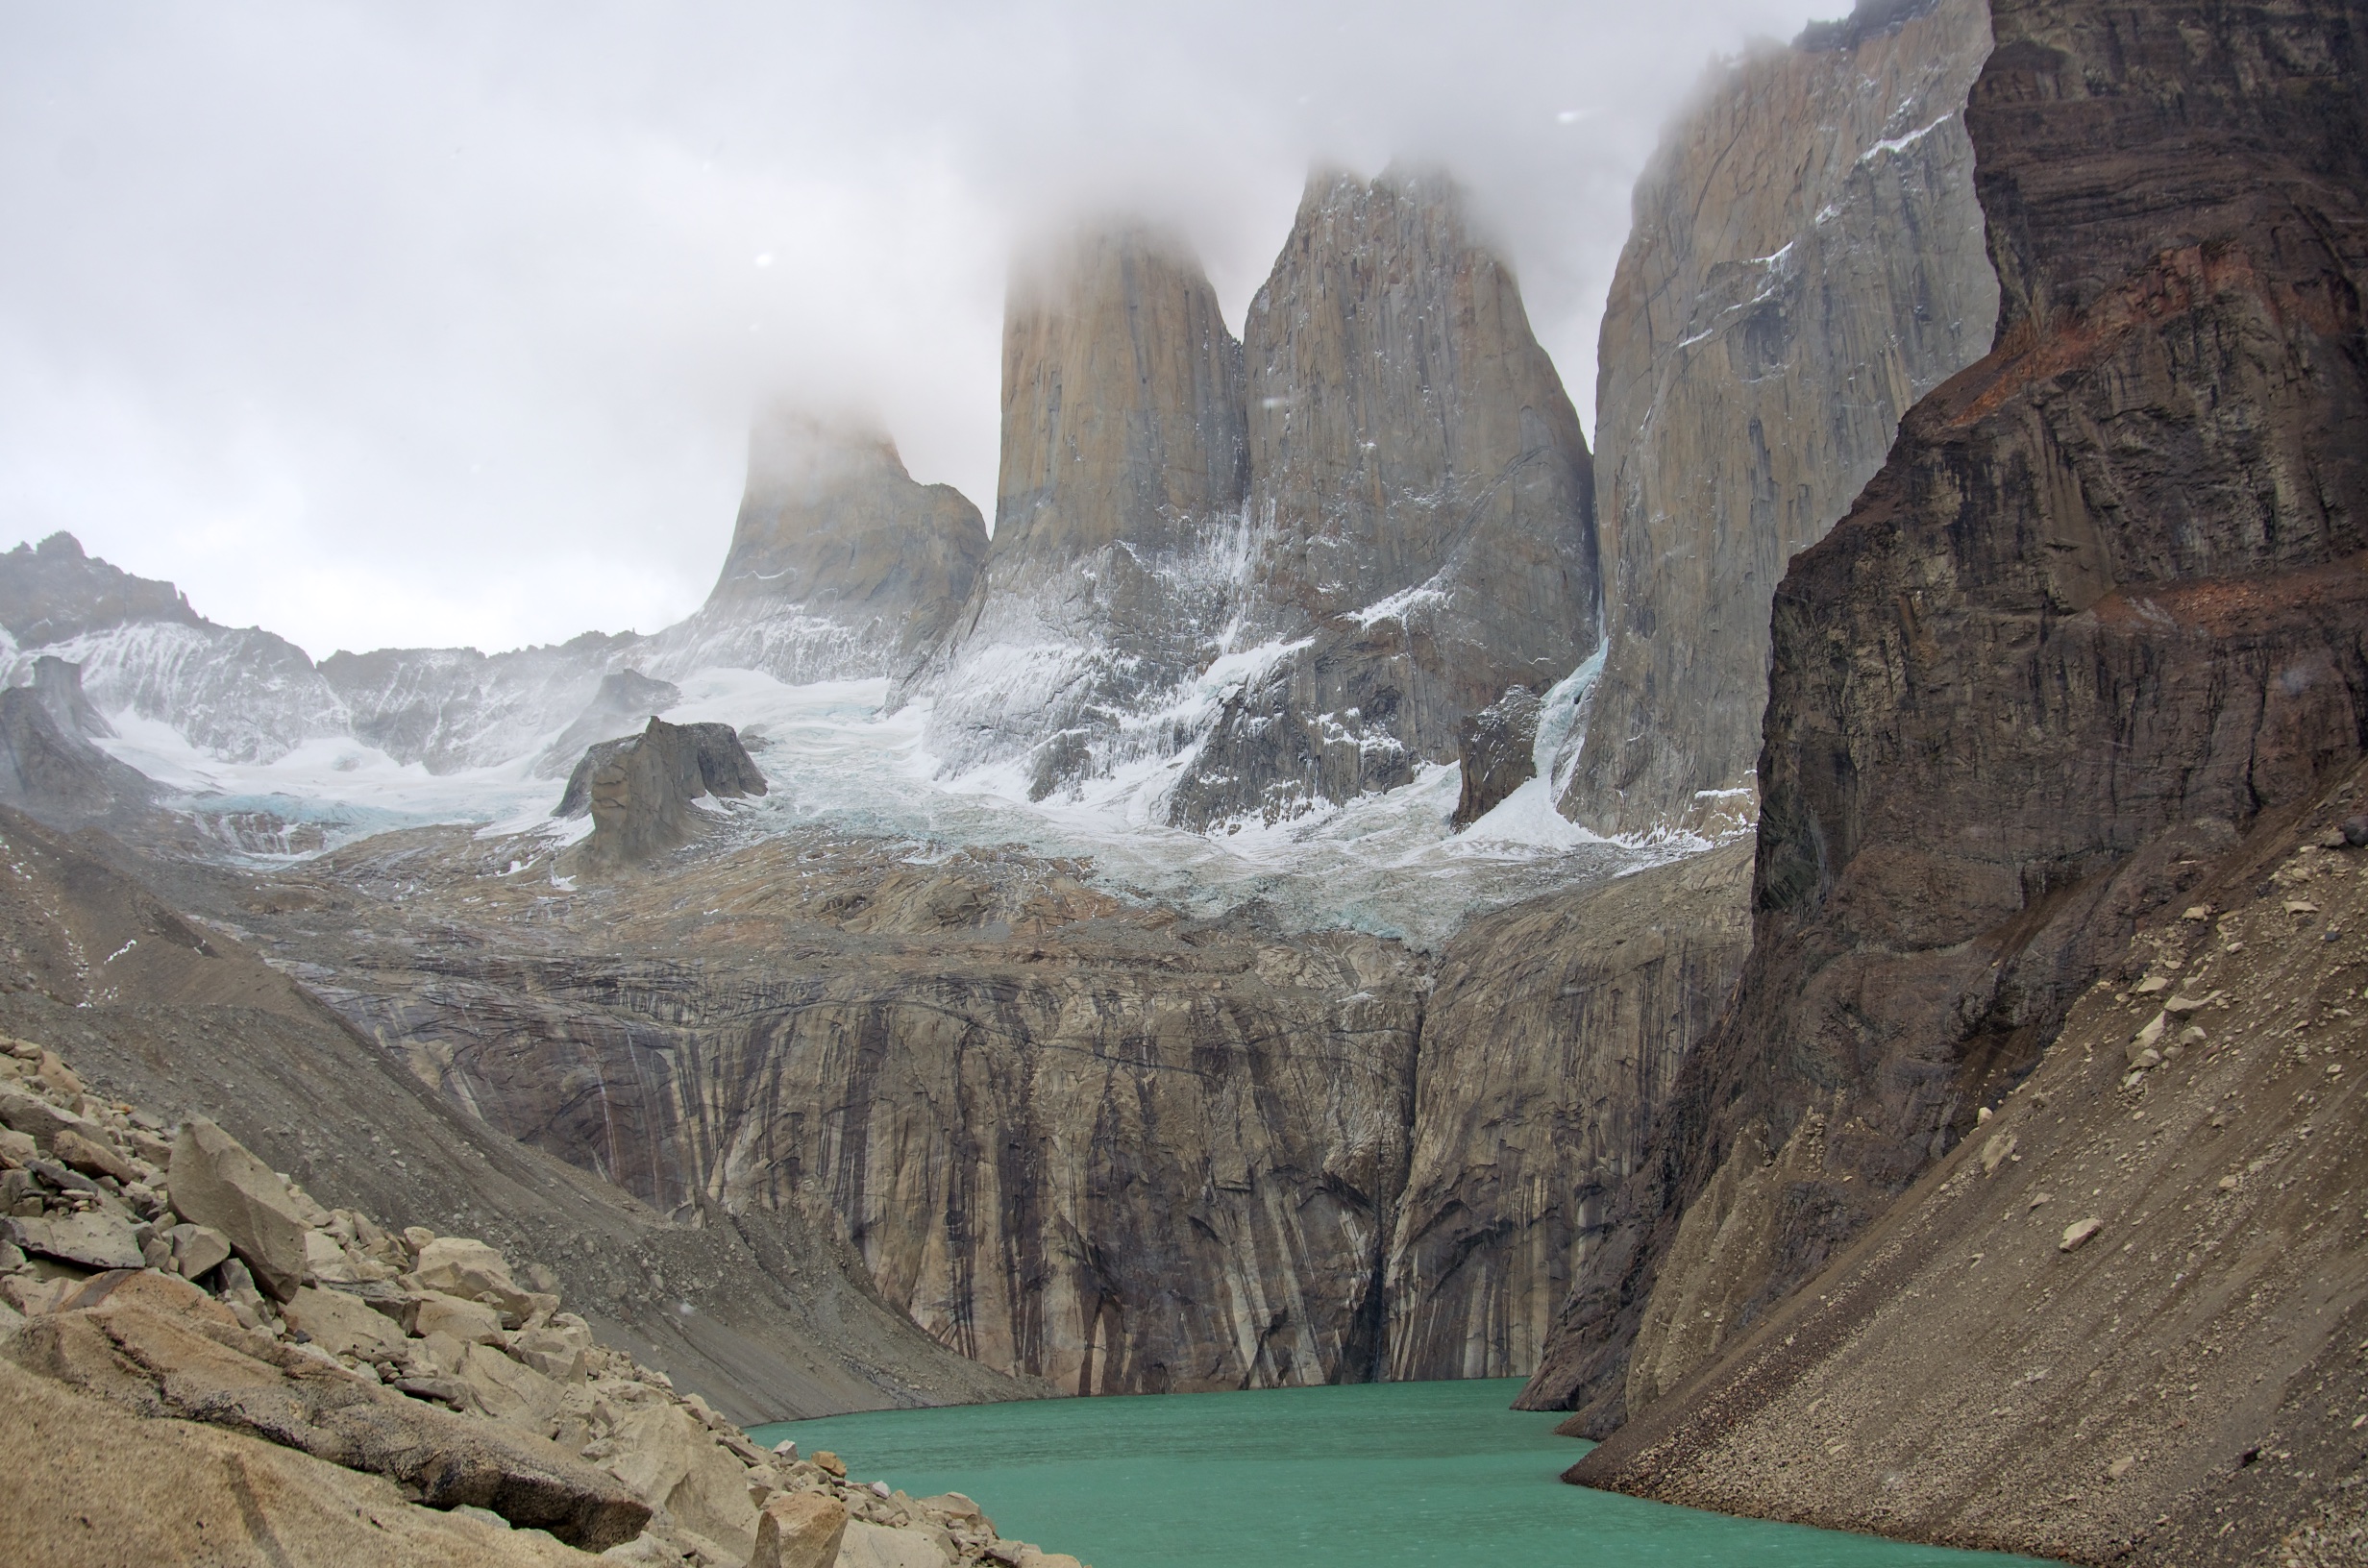  The Towers, Torres del Paine, Patagonia, Chile 